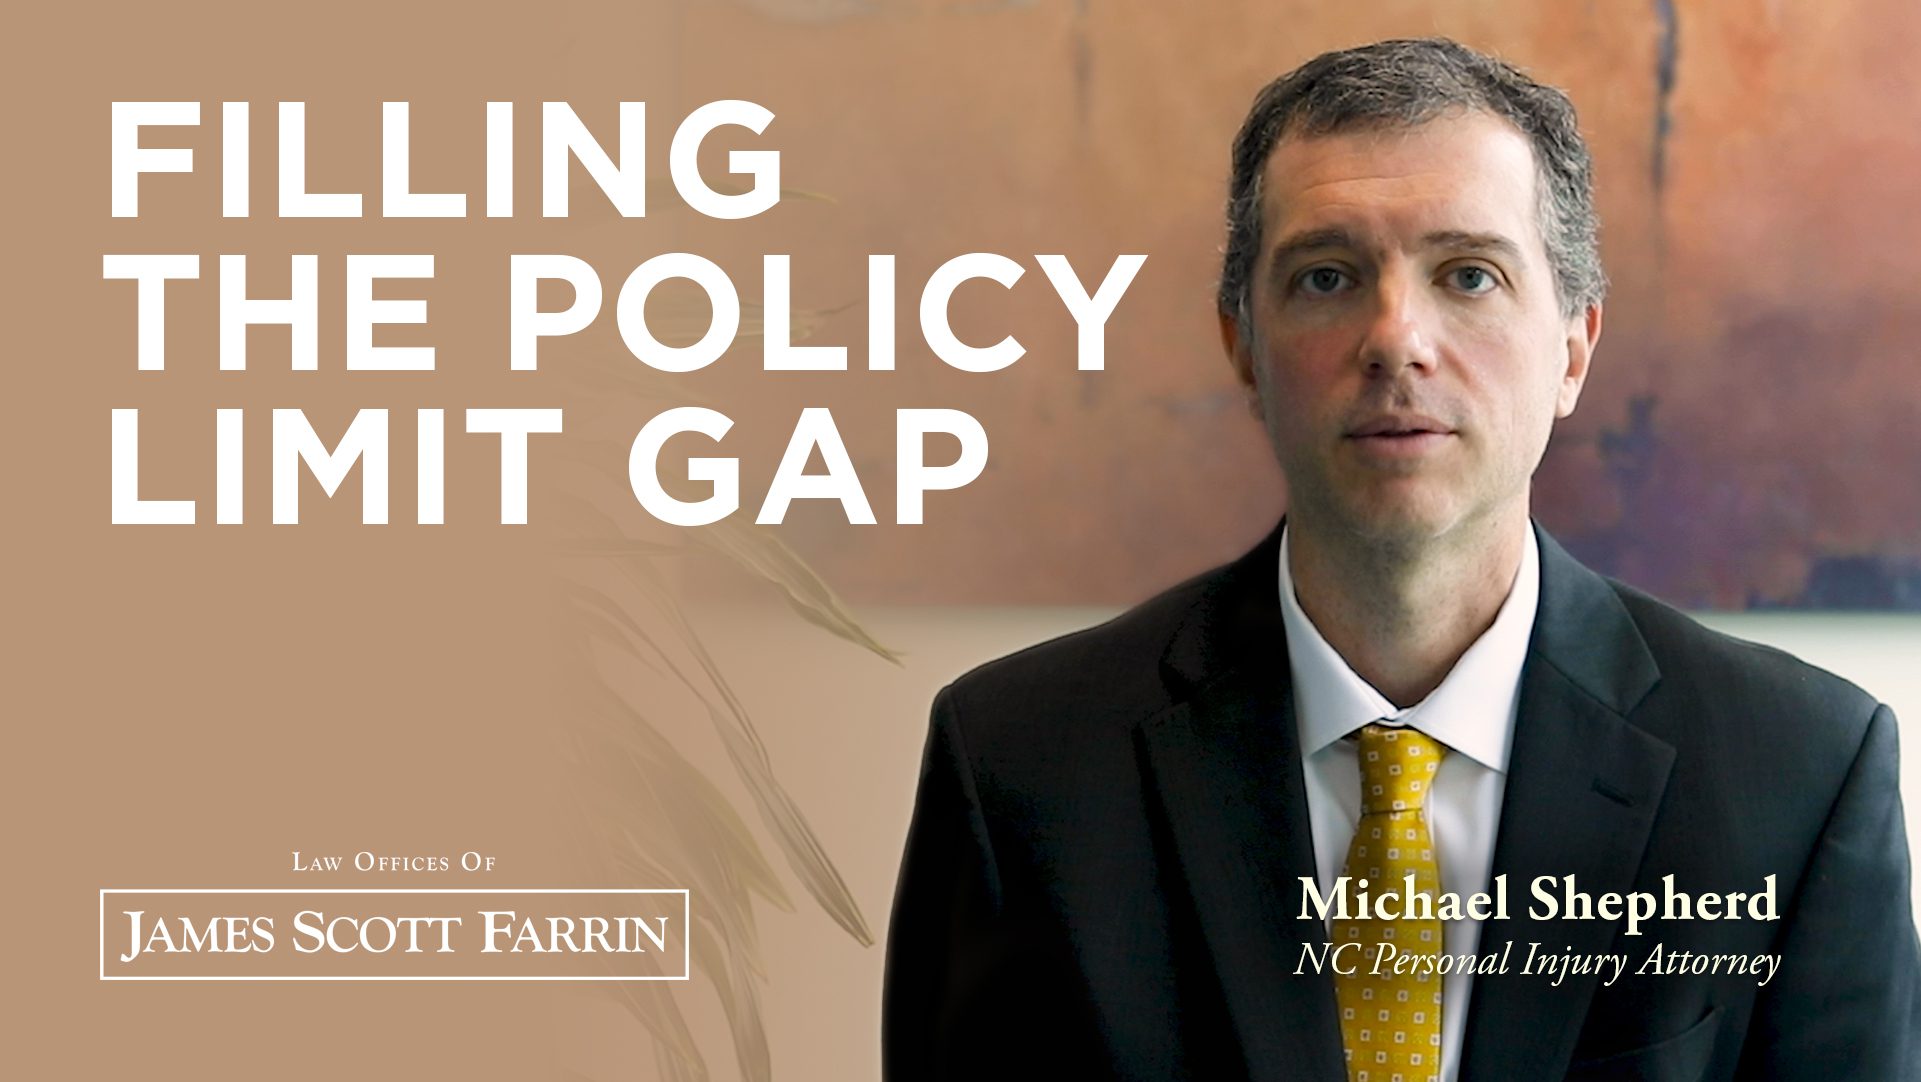 Filling the Policy Limit Gap by attorney Michael Shepherd